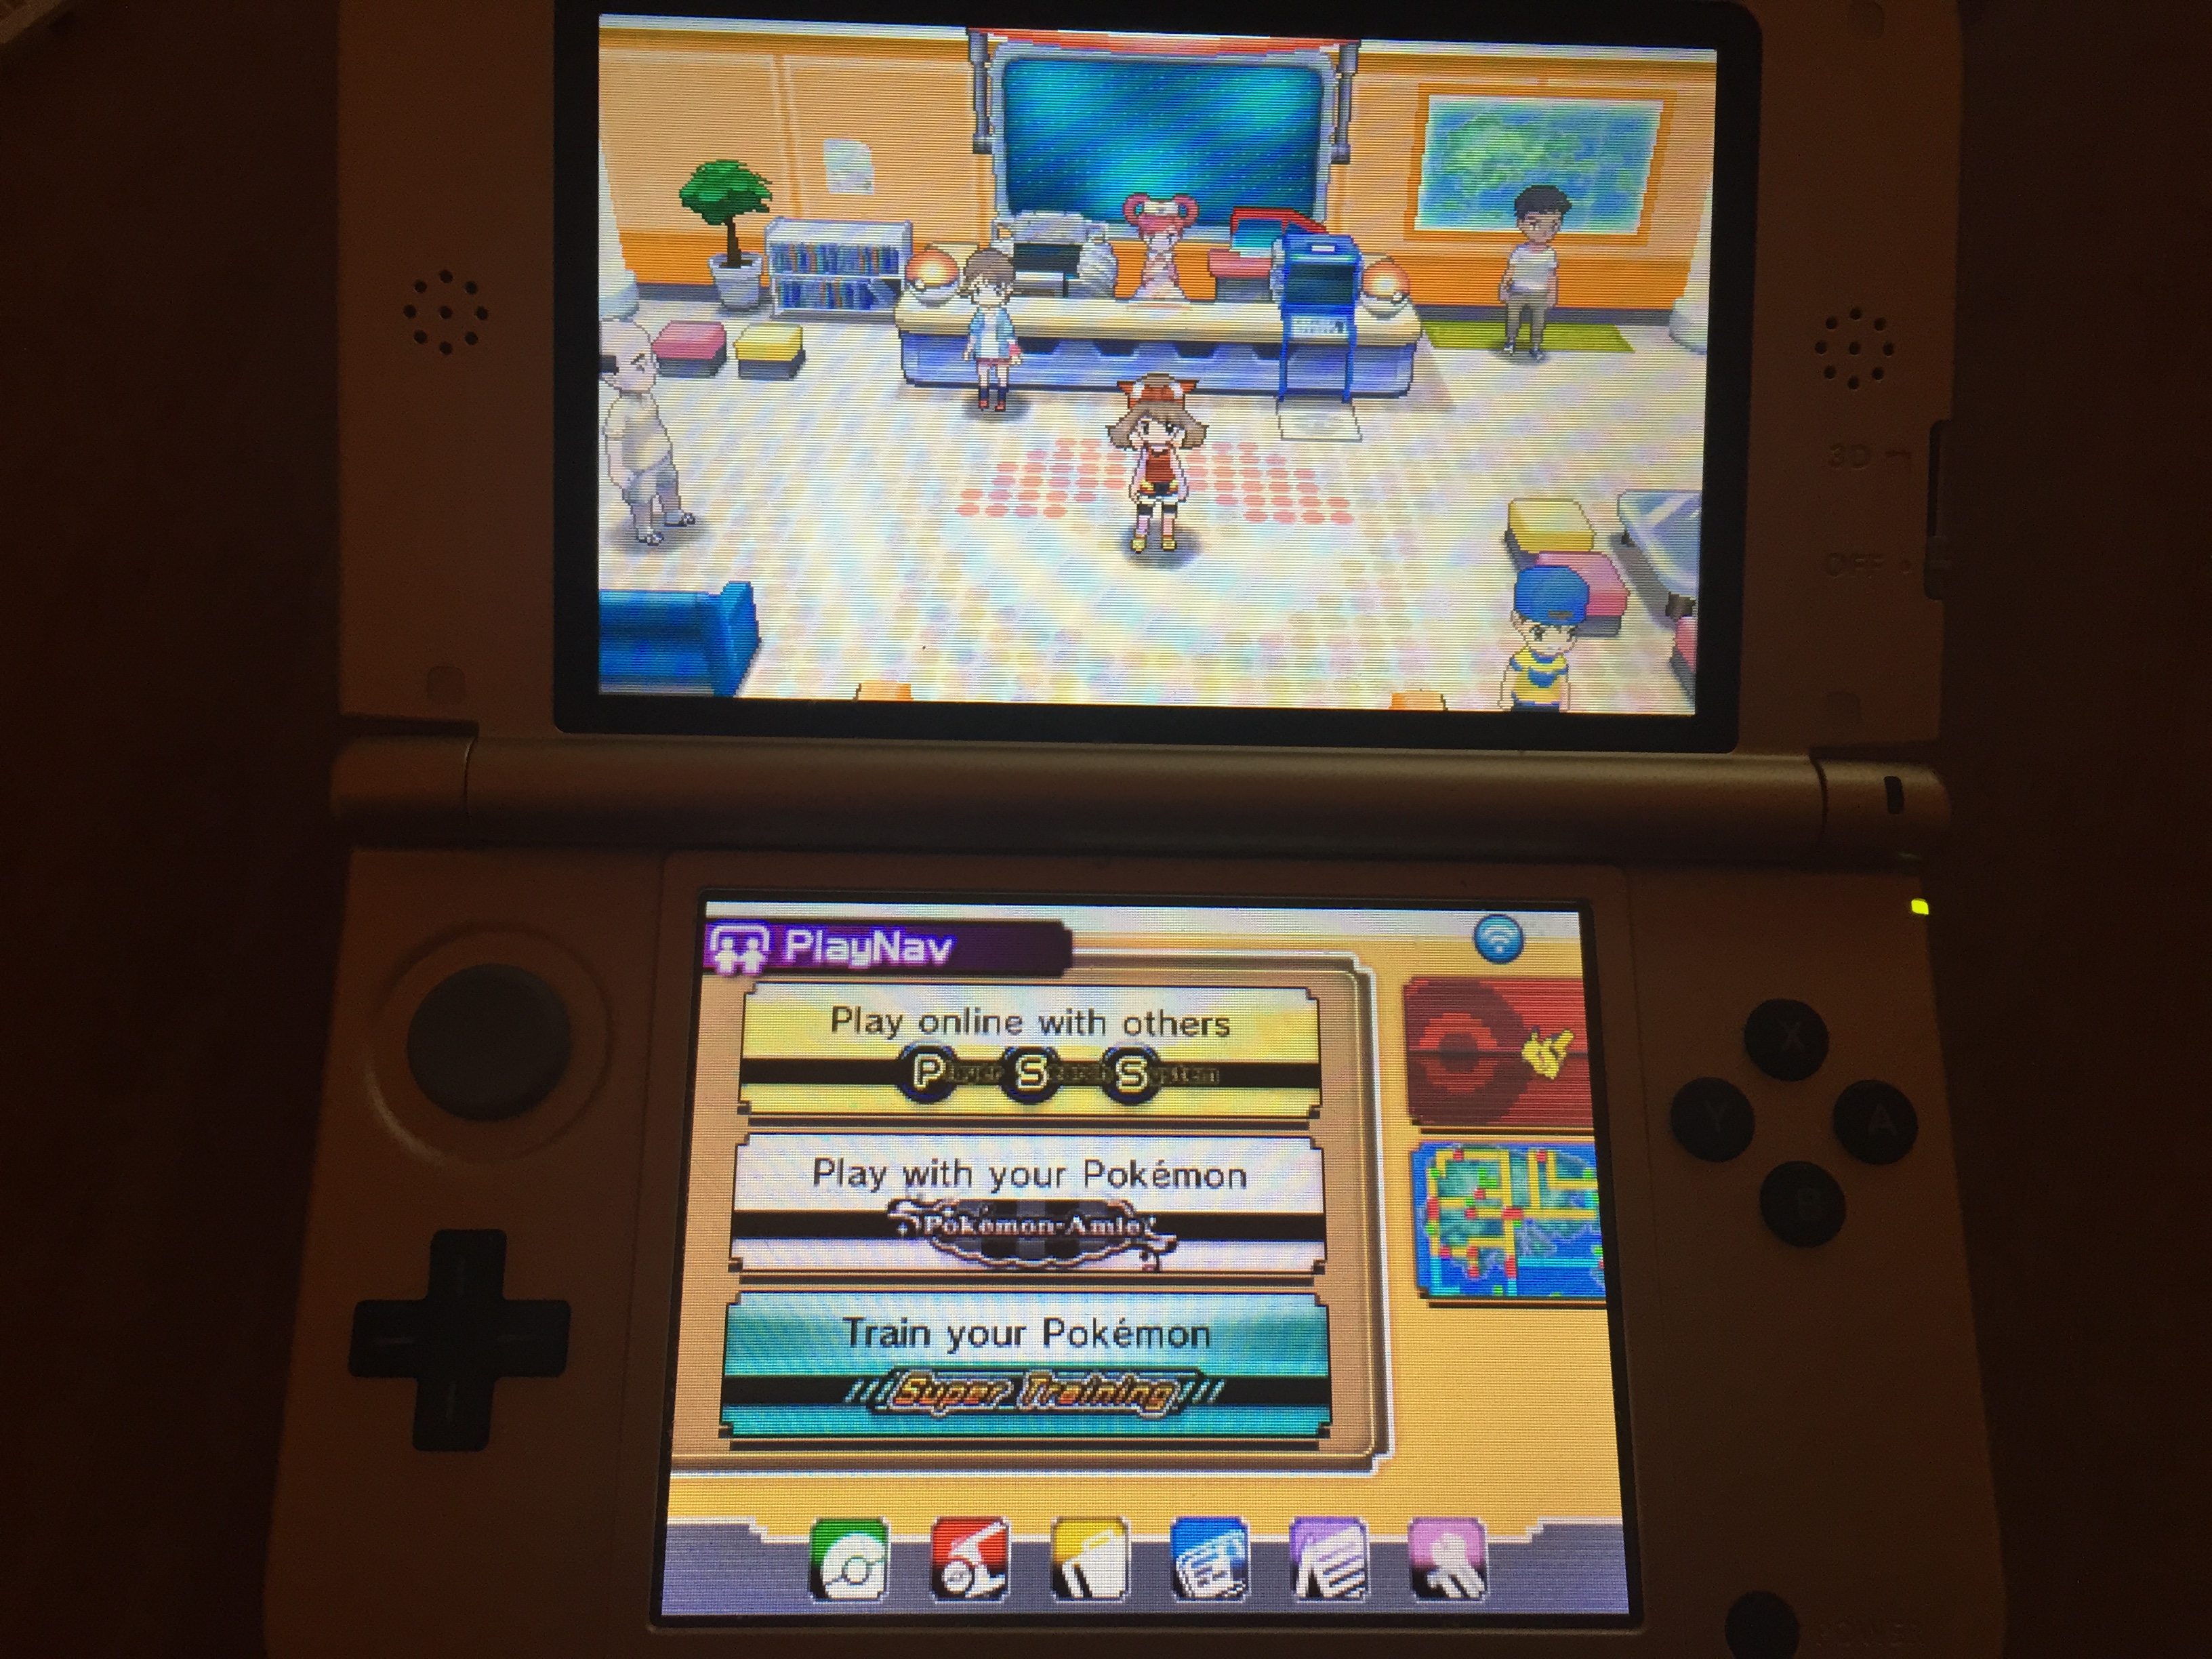 Pokémon Omega Ruby and Alpha Sapphire Review (3DS)